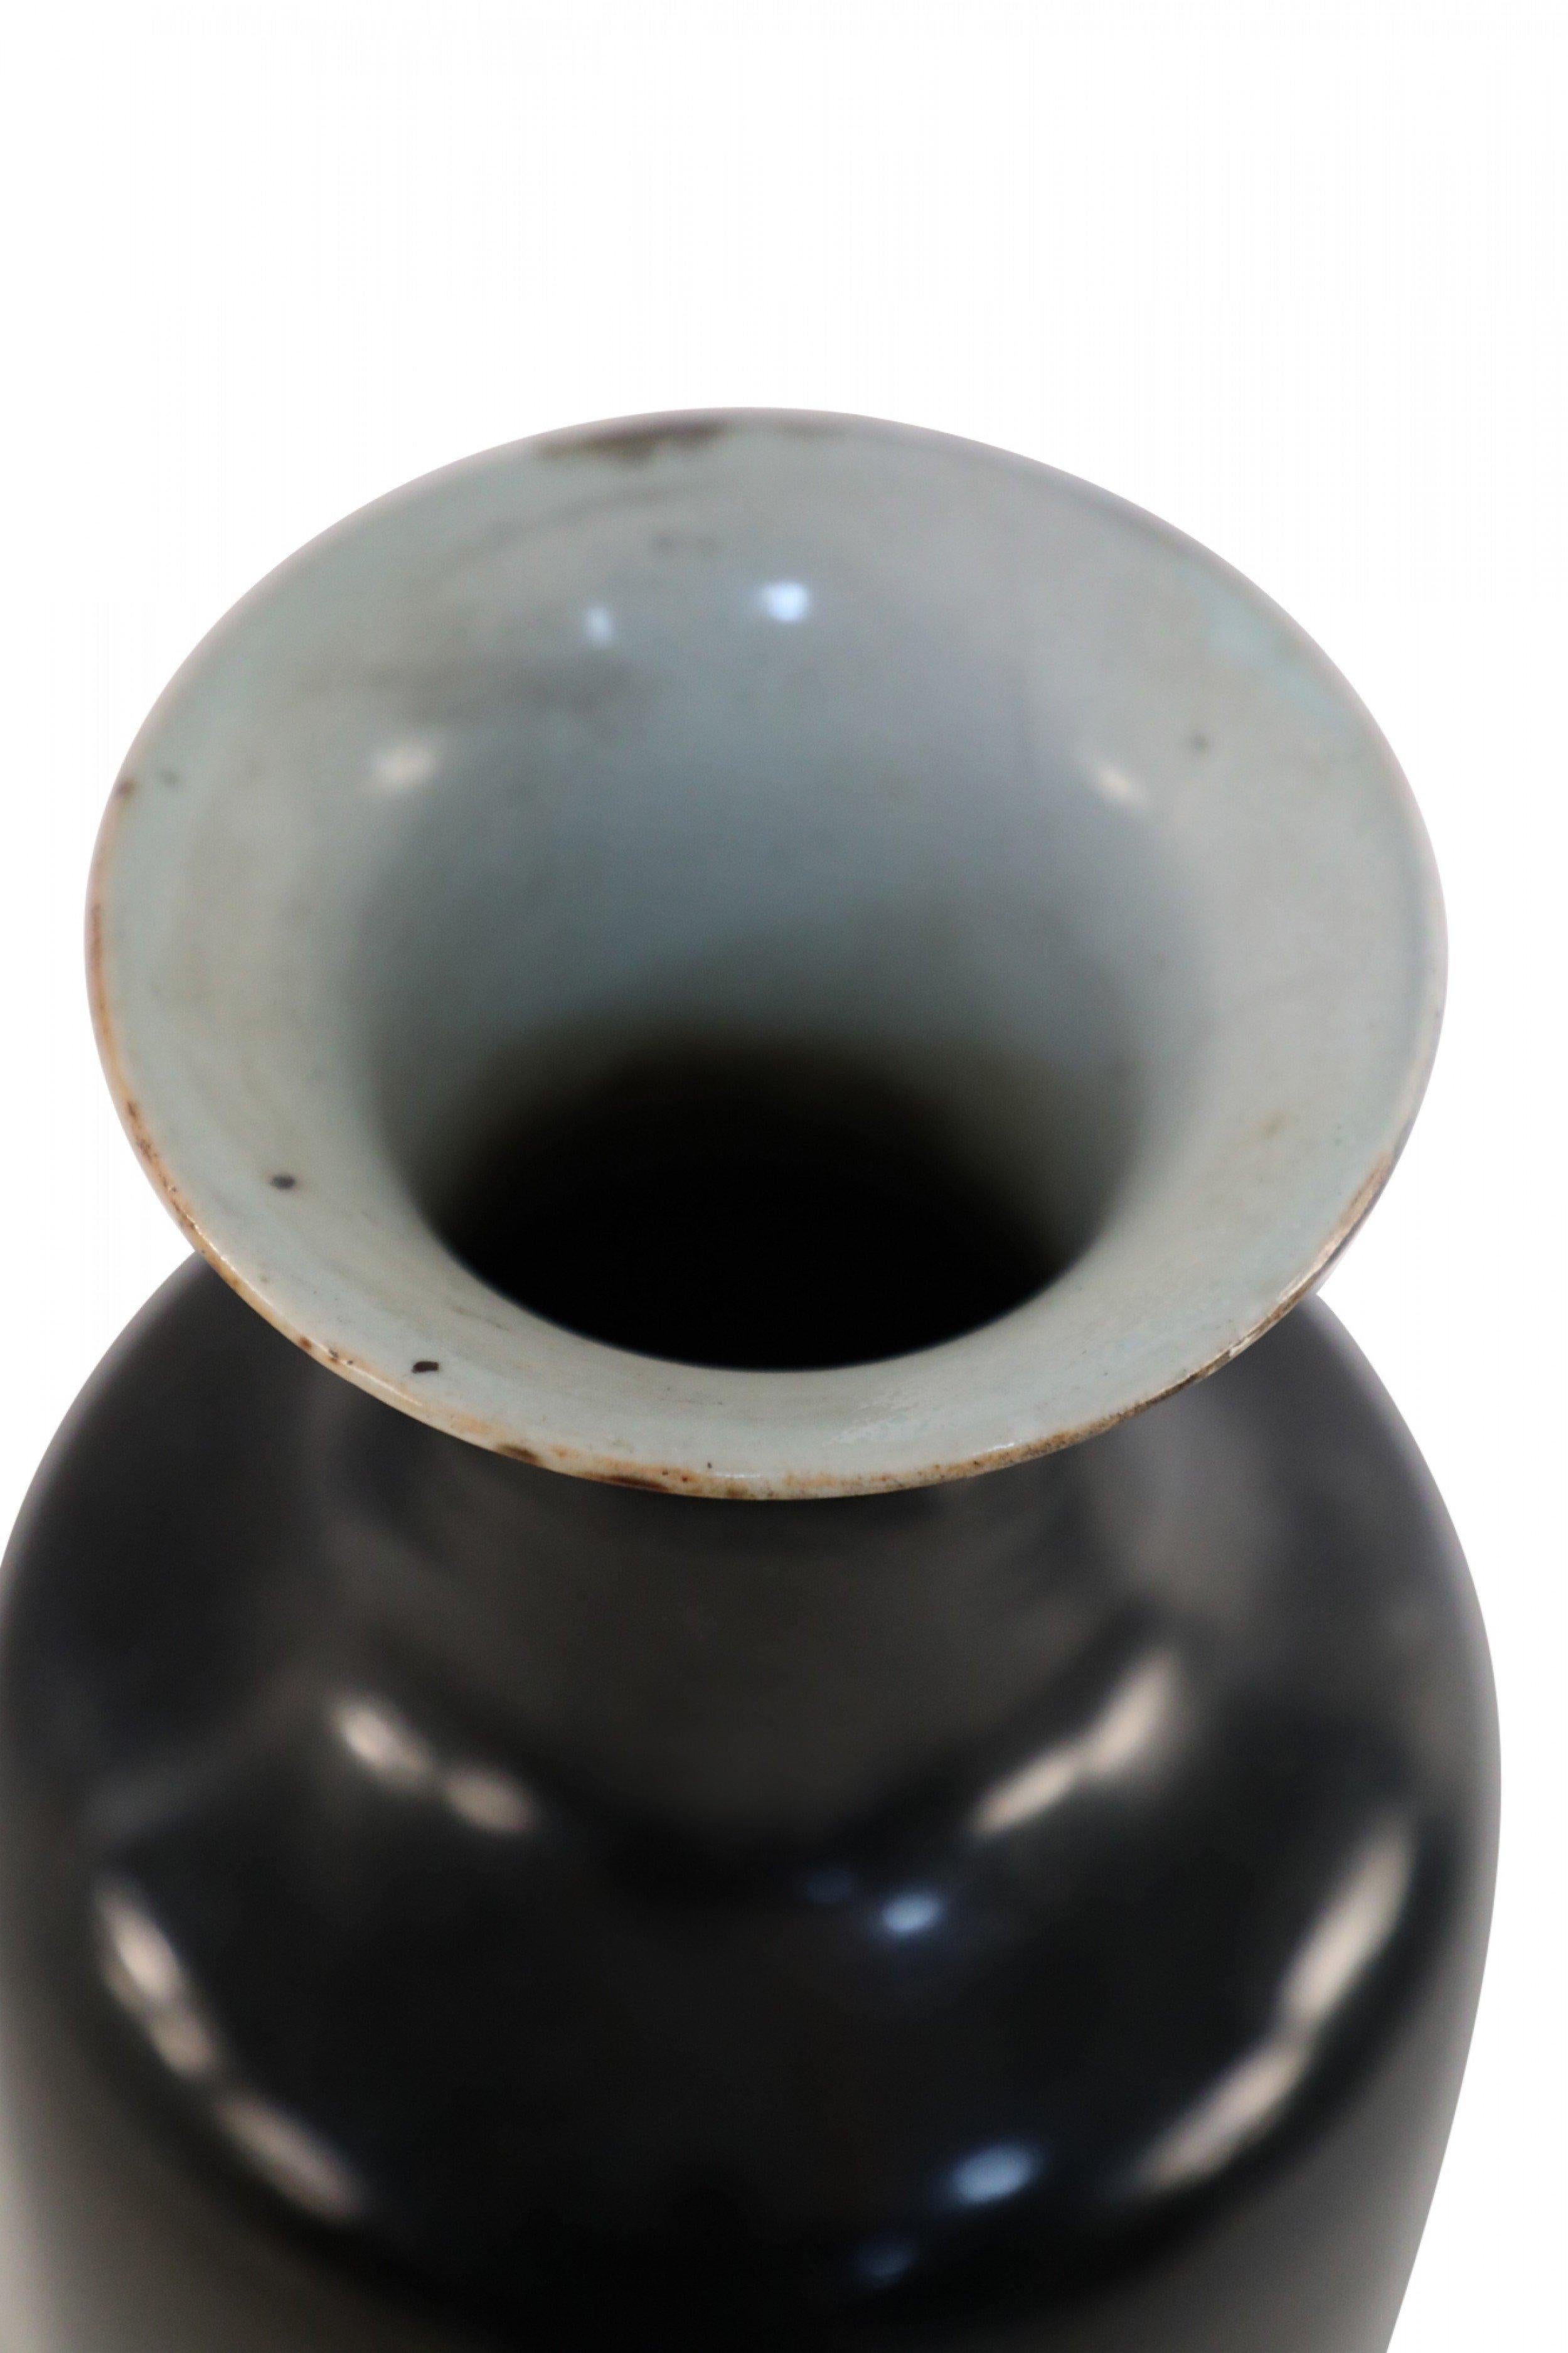 Chinese black glazed porcelain vase with a tall, slim shape and a white interior.
  